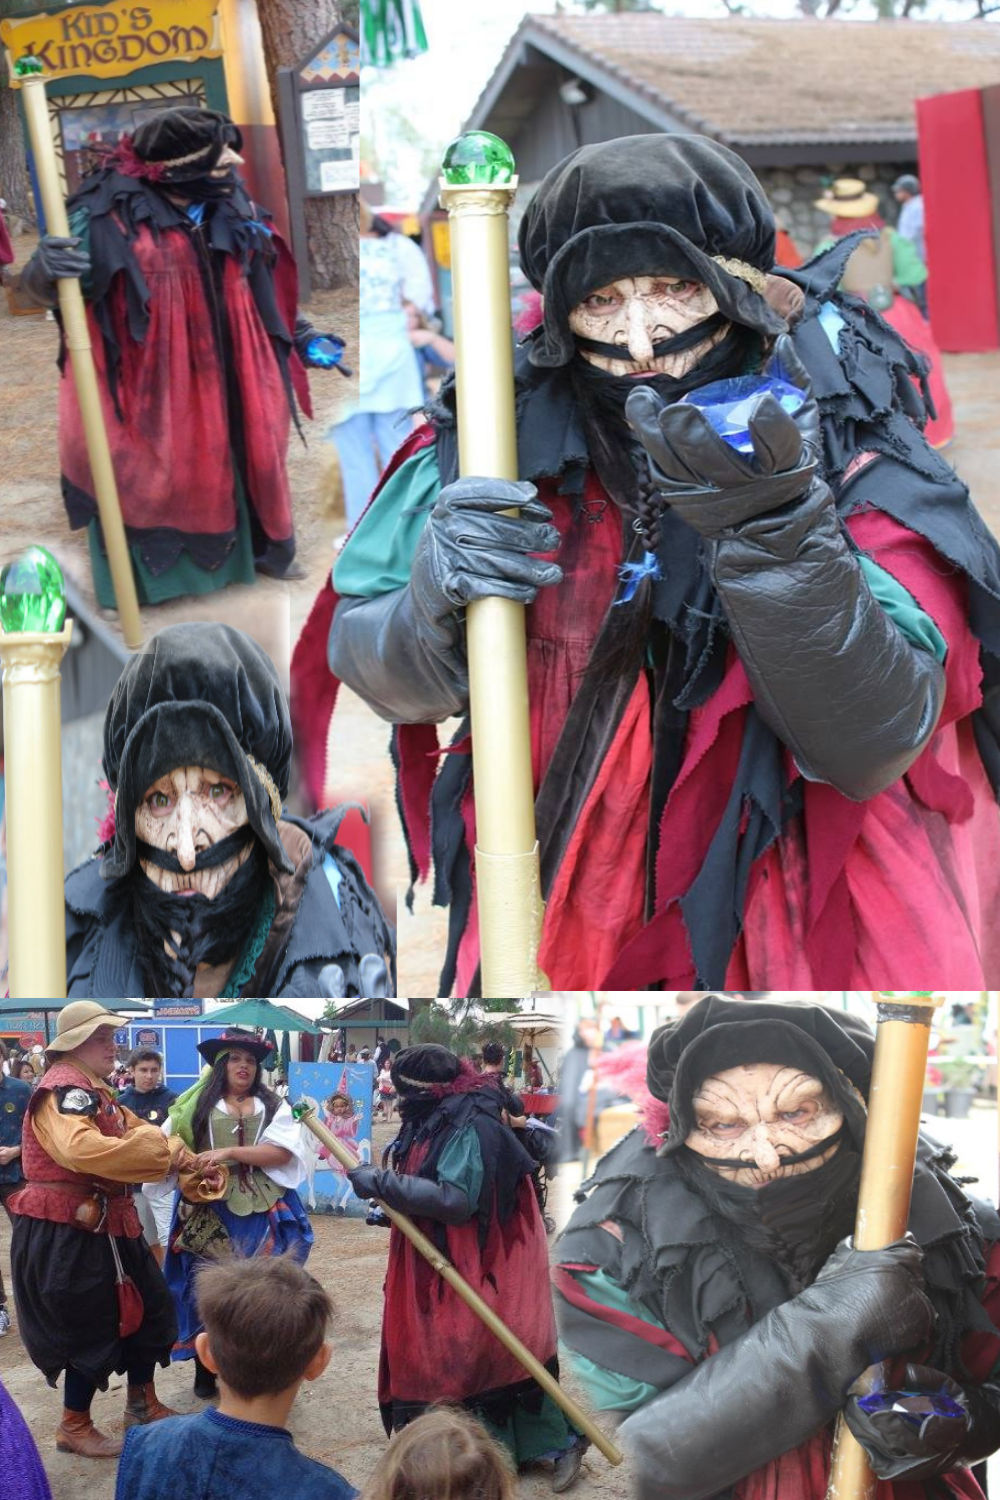 Collage of the EVIL Male Wizard, Sniffleworts, with glaring green eyes and holding the Magic BLUE Sapphire during the 2015 Original Renaissance Pleasure Faire